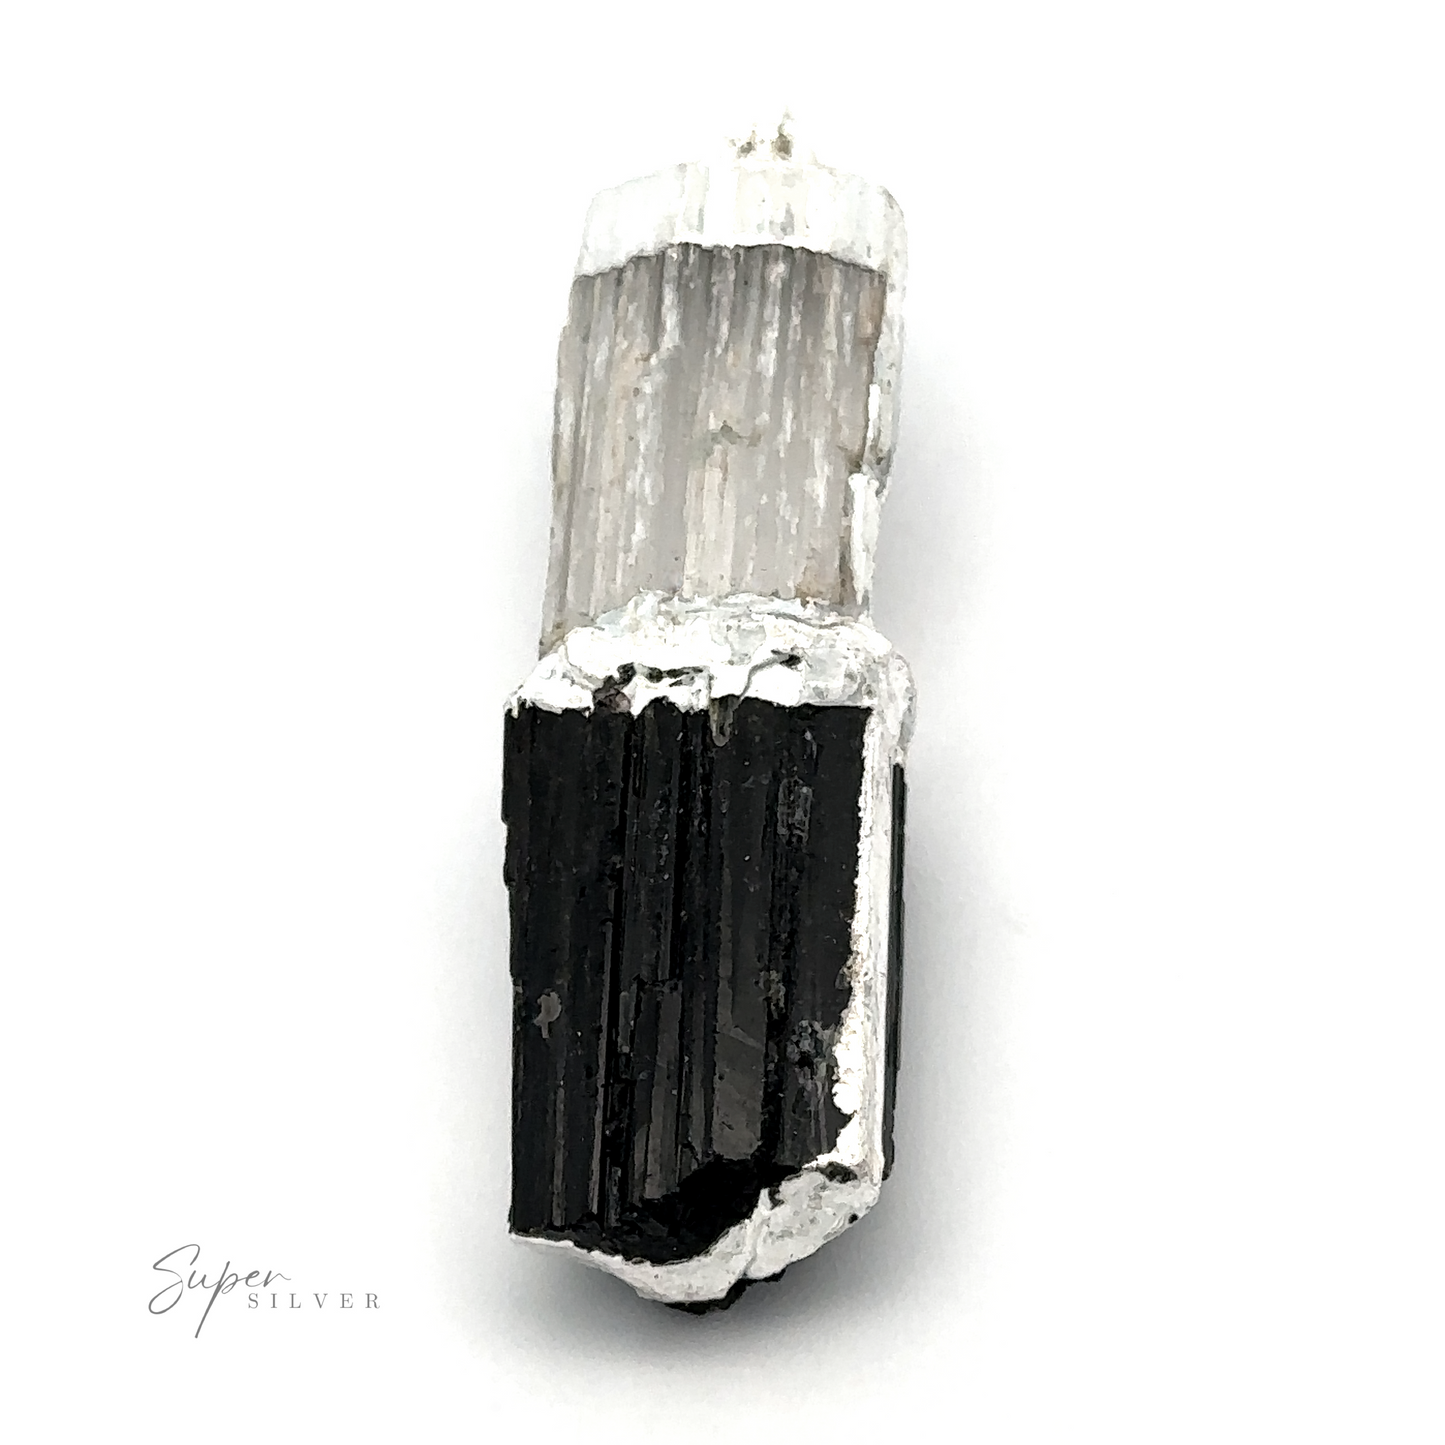 
                  
                    A Tourmaline and Selenite Pendant, vertically aligned, with the black section on the lower half and the white section on the upper half, photographed against a plain white background. This crystal pairs beautifully with a selenite pendant for those seeking powerful cleansing crystals.
                  
                